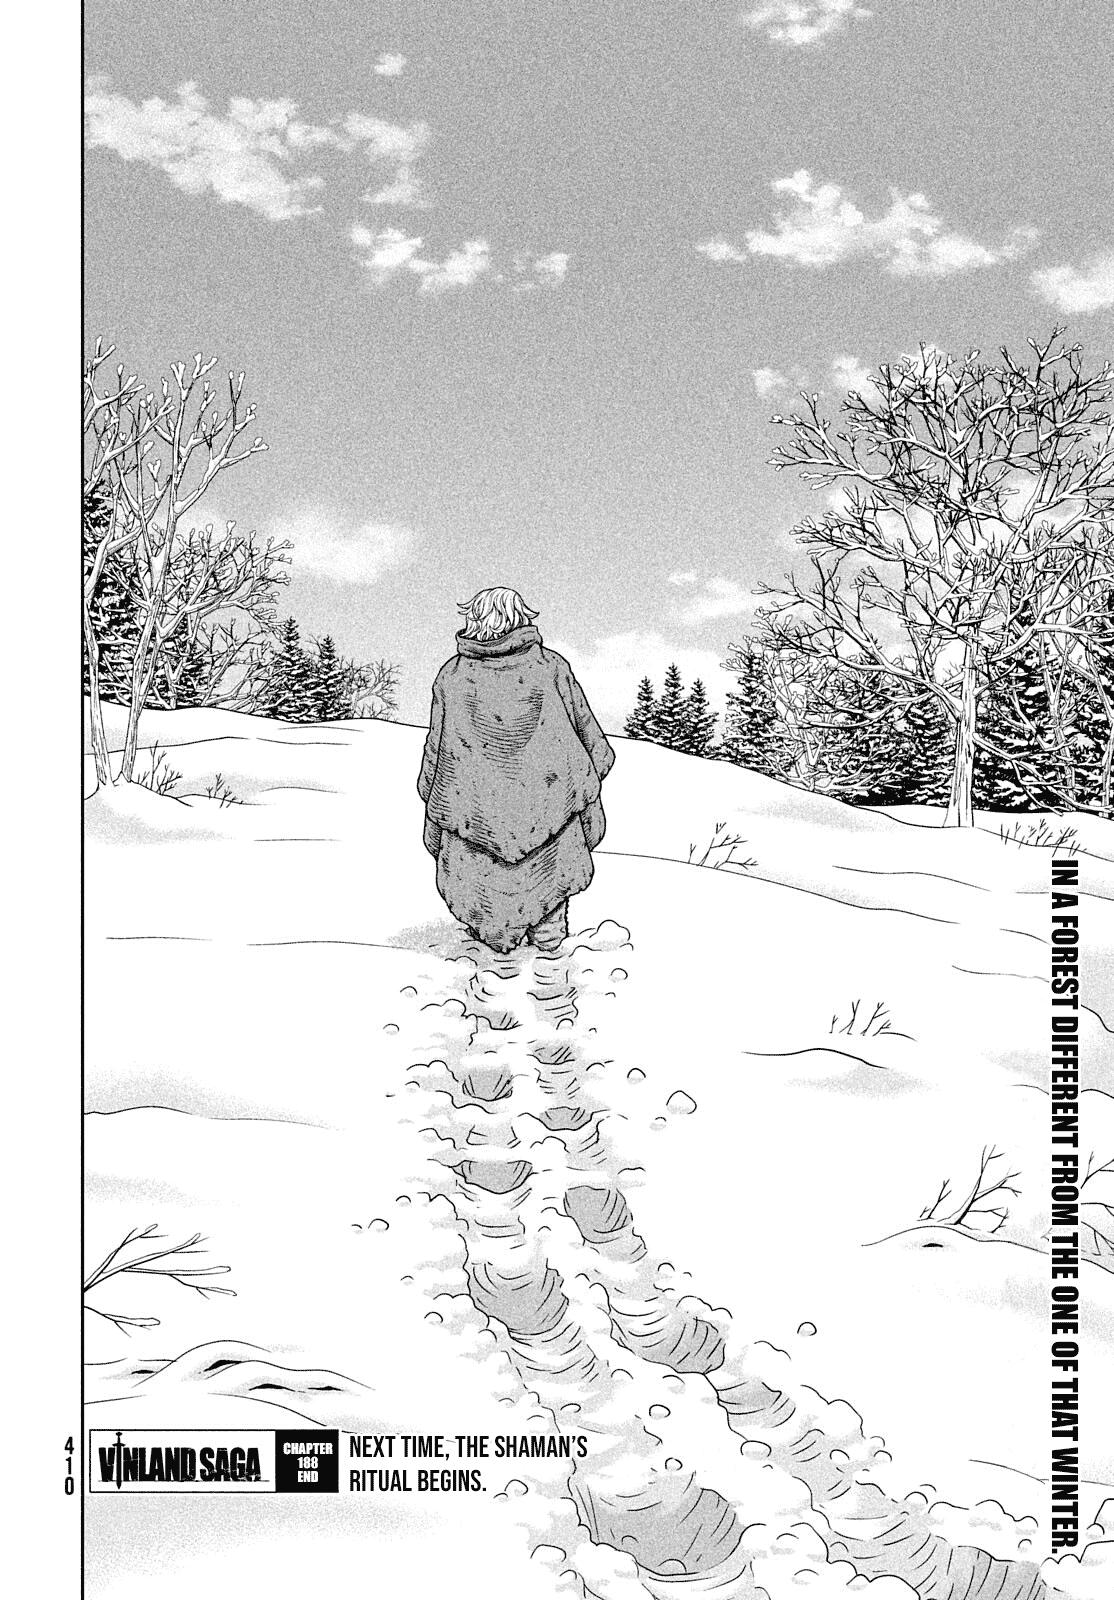 vinland saga 188, vinland saga 188, Read vinland saga 188, vinland saga 188 Manga, vinland saga 188 english, vinland saga 188 raw manga, vinland saga 188 online, vinland saga 188 high quality, vinland saga 188 chapter, vinland saga 188 manga scan